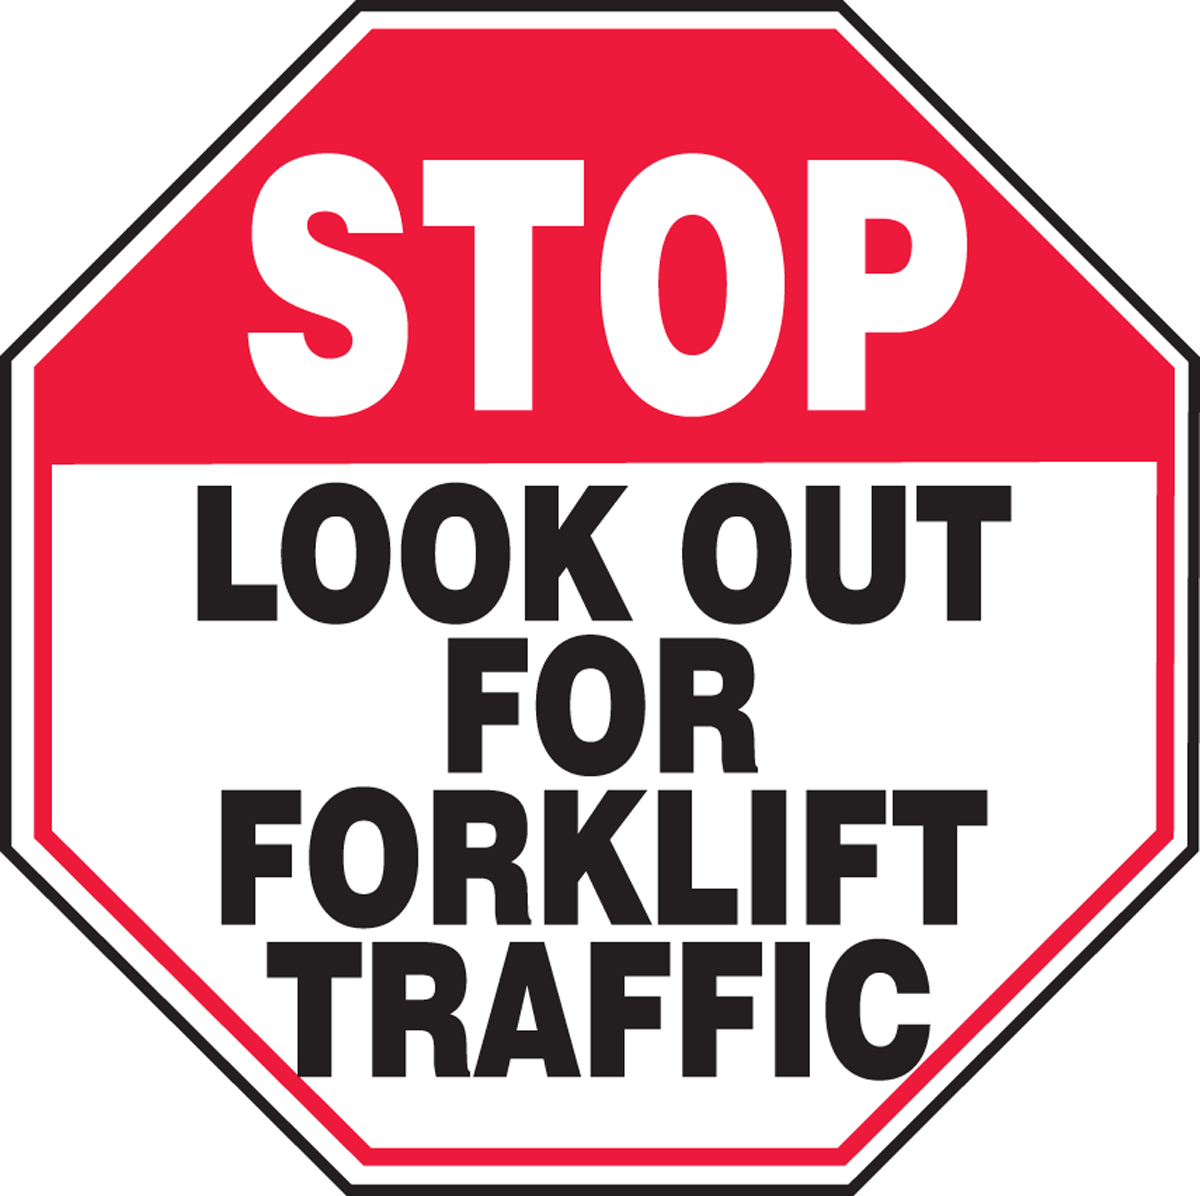 STOP LOOK OUT FOR FORKLIFT TRAFFIC